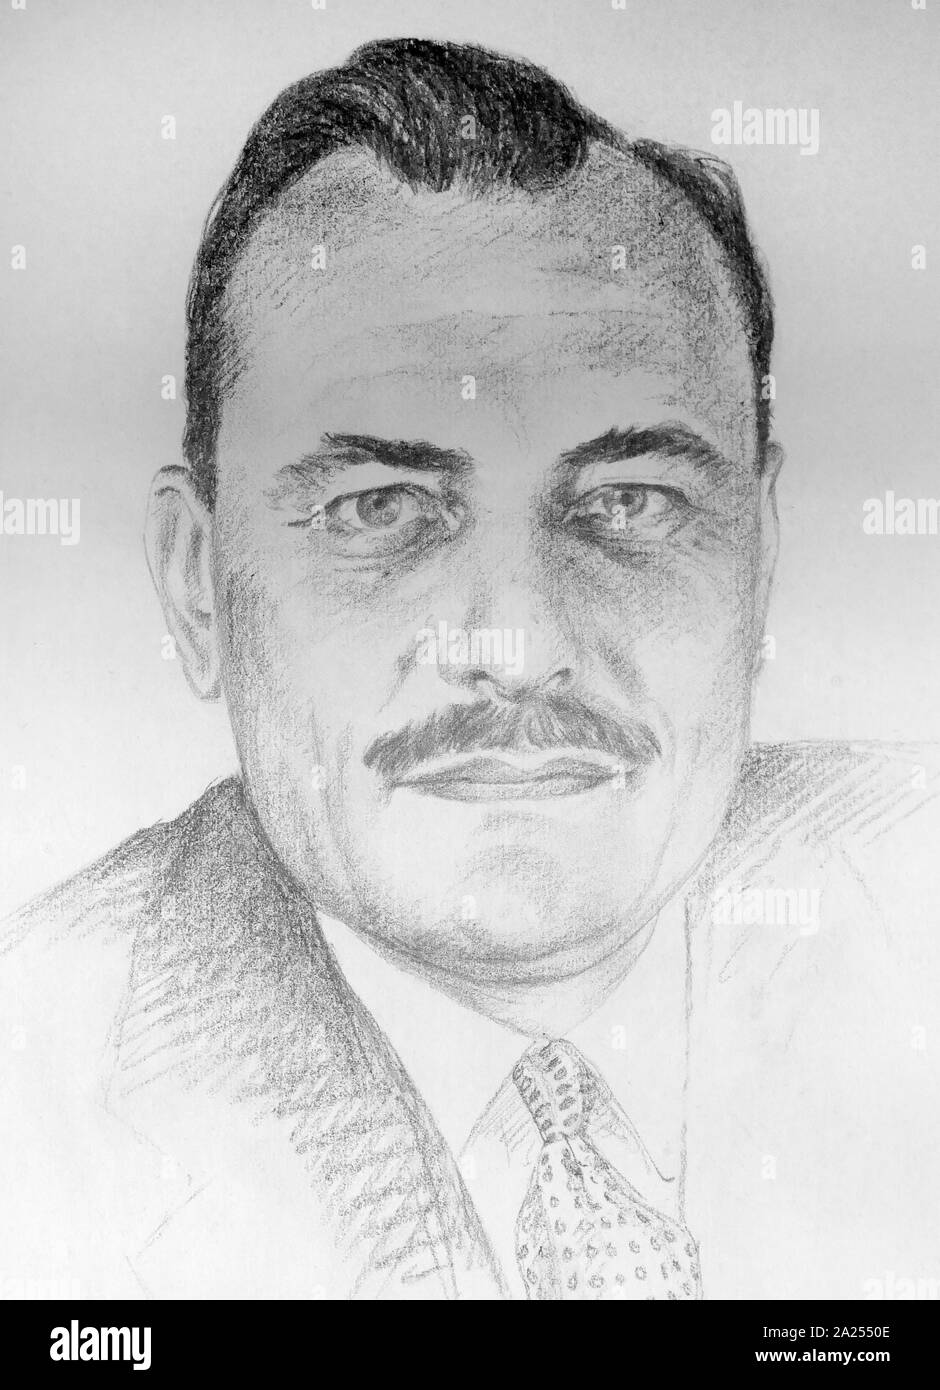 Pencil Portrait of John Enoch Powell, (1912 - 1998), British politician, classical scholar and poet. He served as a Conservative Member of Parliament (MP, 1950-74), Ulster Unionist Party (UUP) MP (1974-87), and Minister of Health (1960-63). By J J Hilbert. Stock Photo